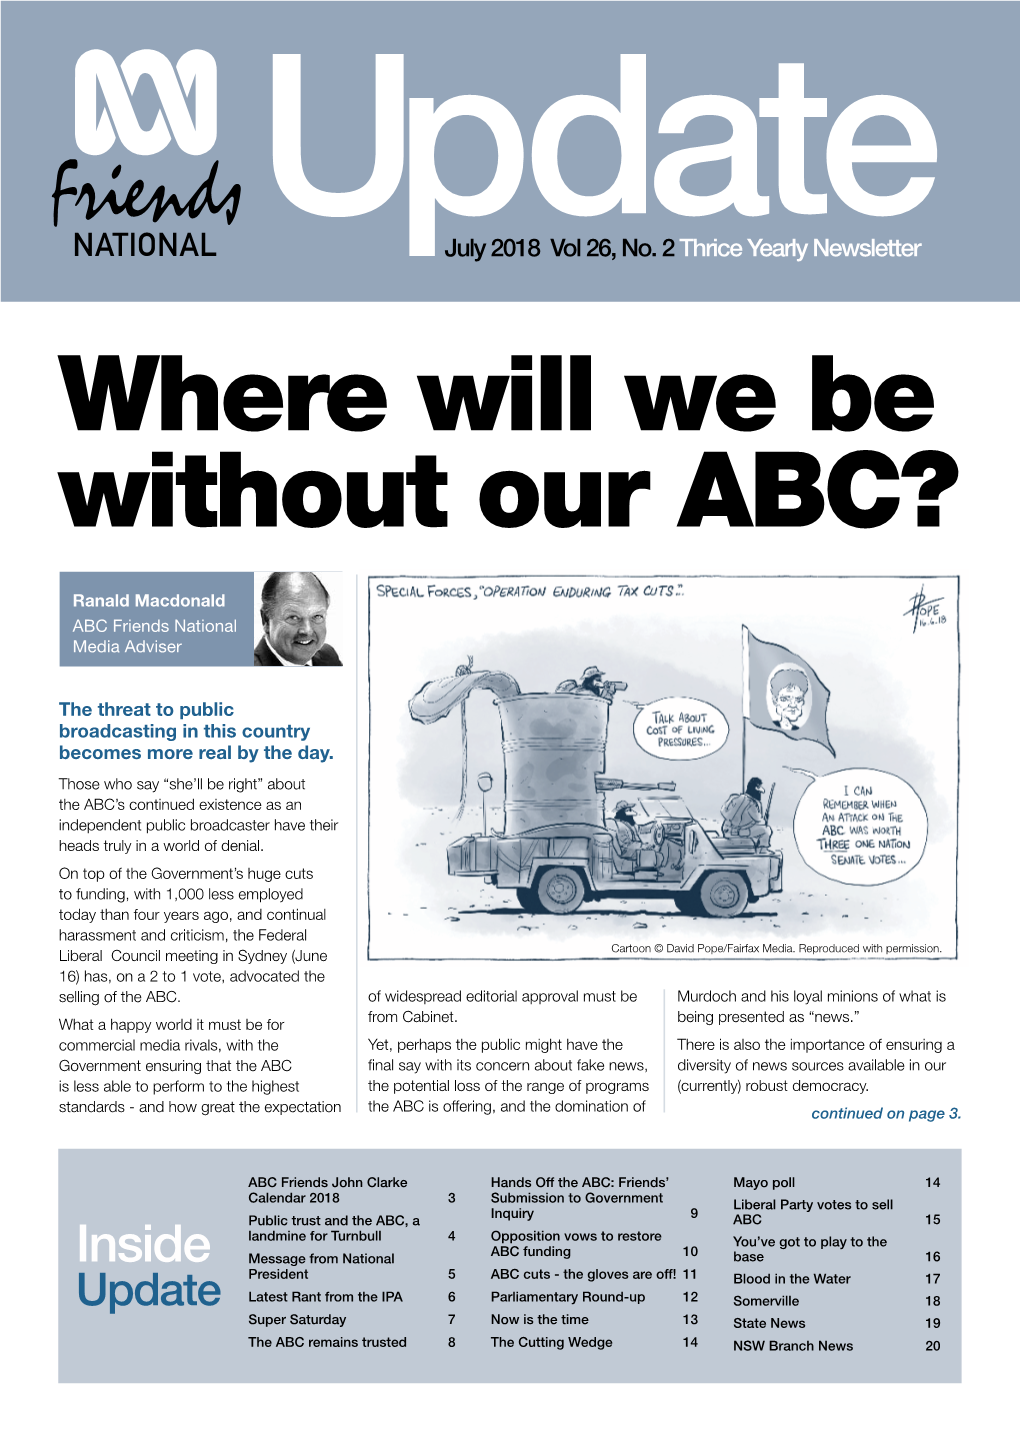 Where Will We Be Without Our ABC?